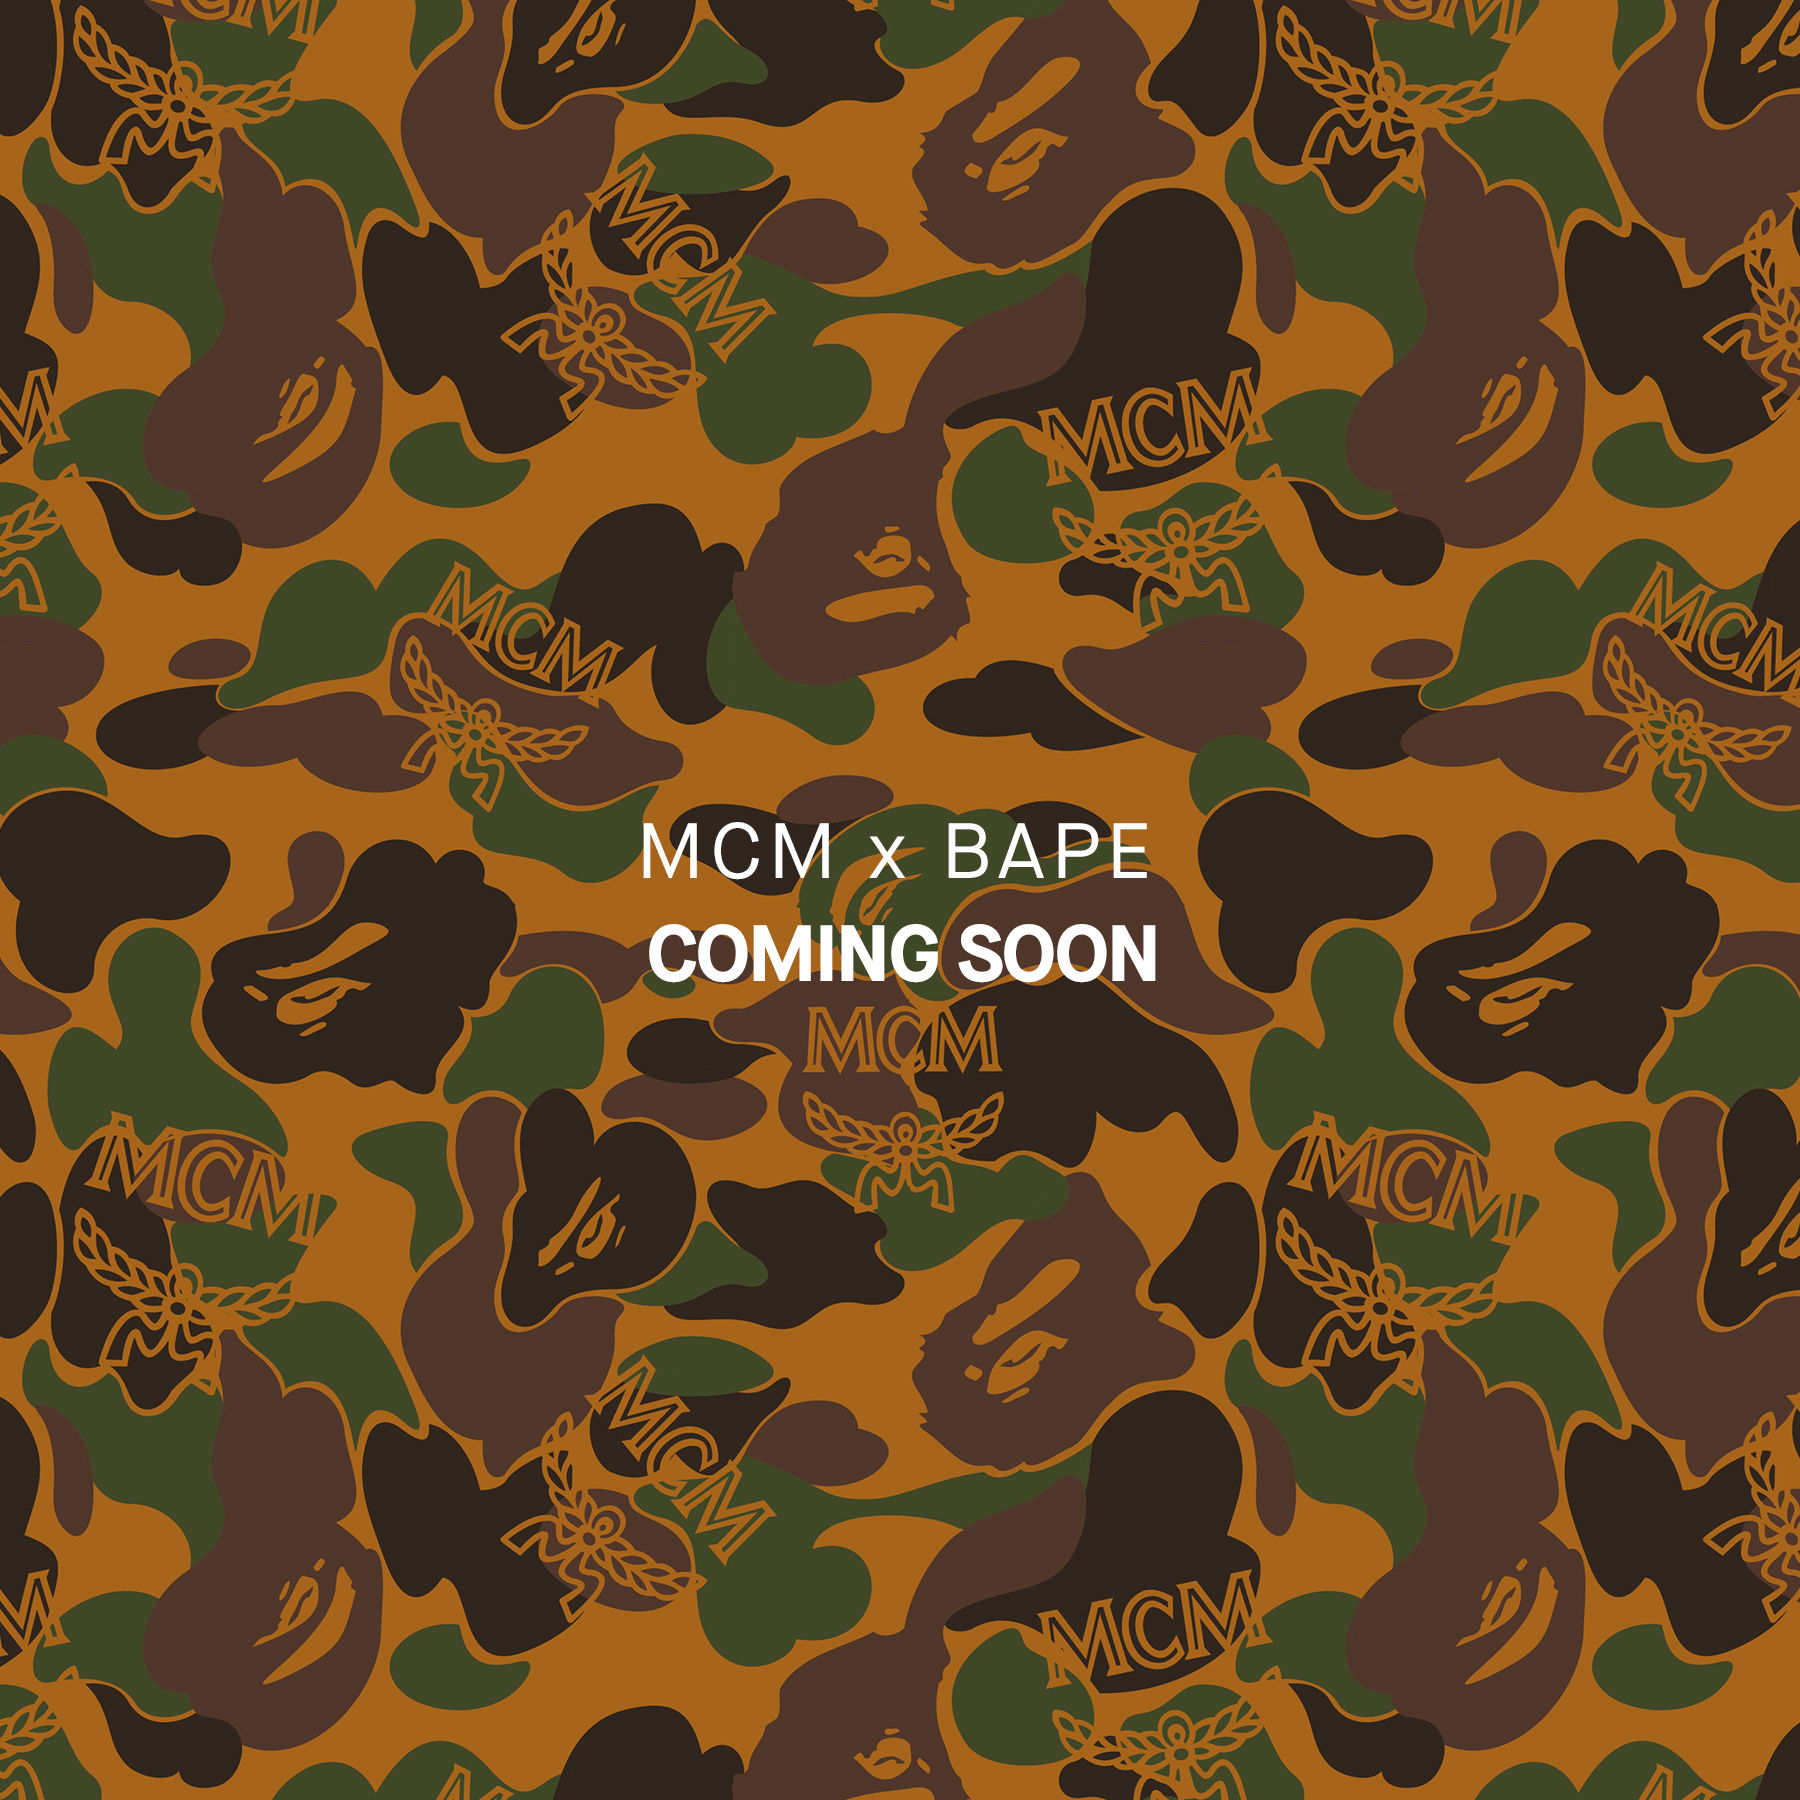 Just in: MCM x Bape capsule collection sees luxury pairing with